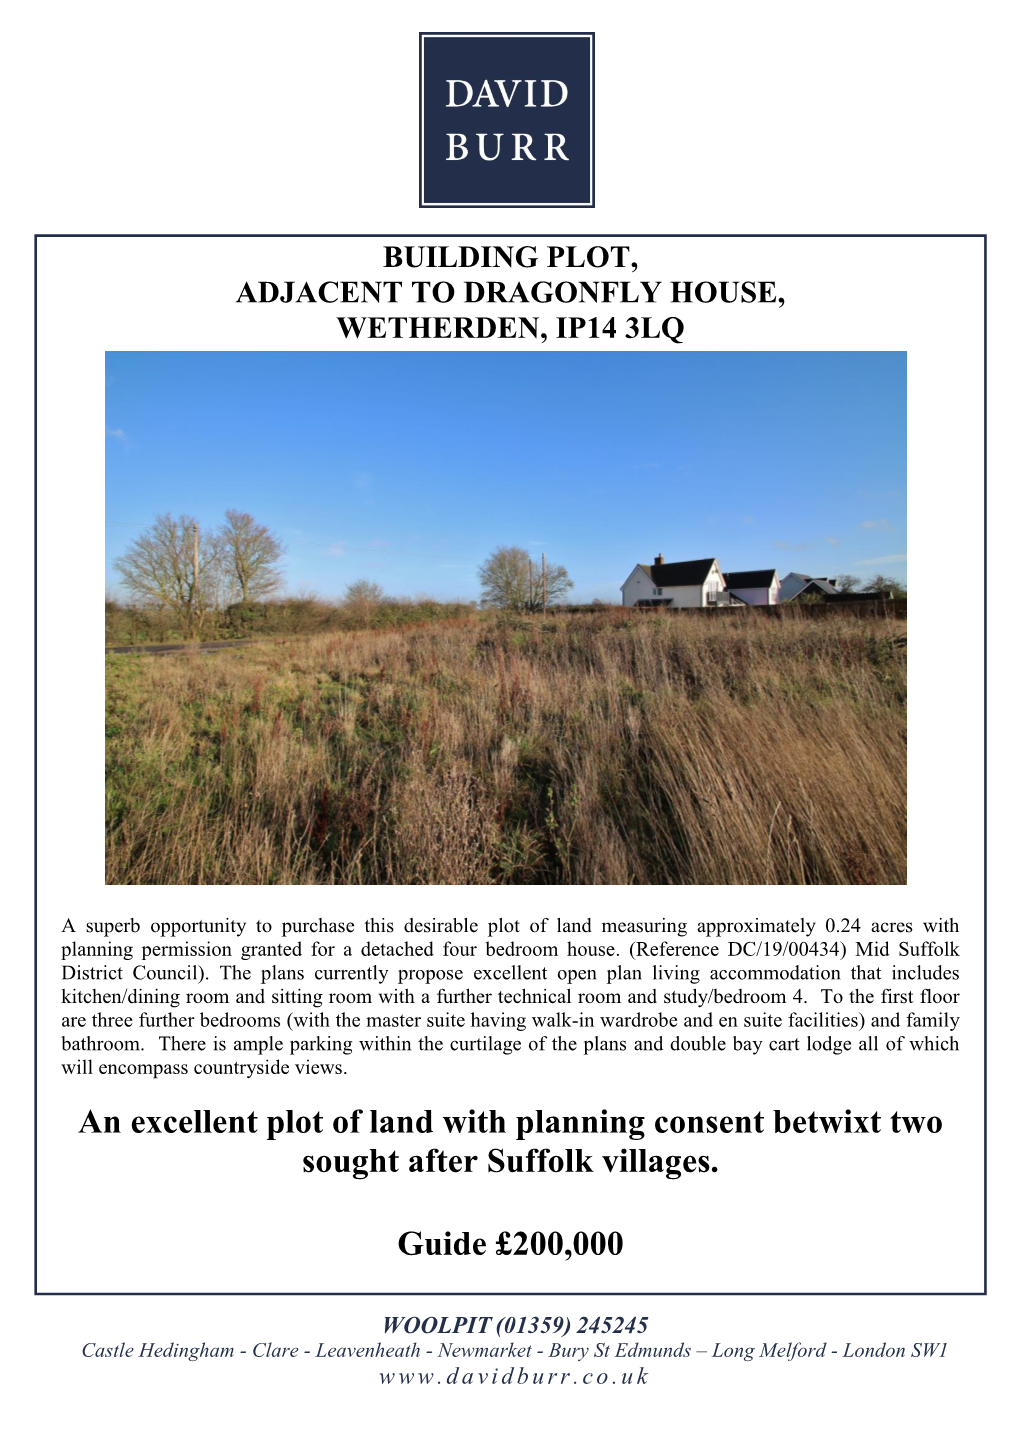 An Excellent Plot of Land with Planning Consent Betwixt Two Sought After Suffolk Villages